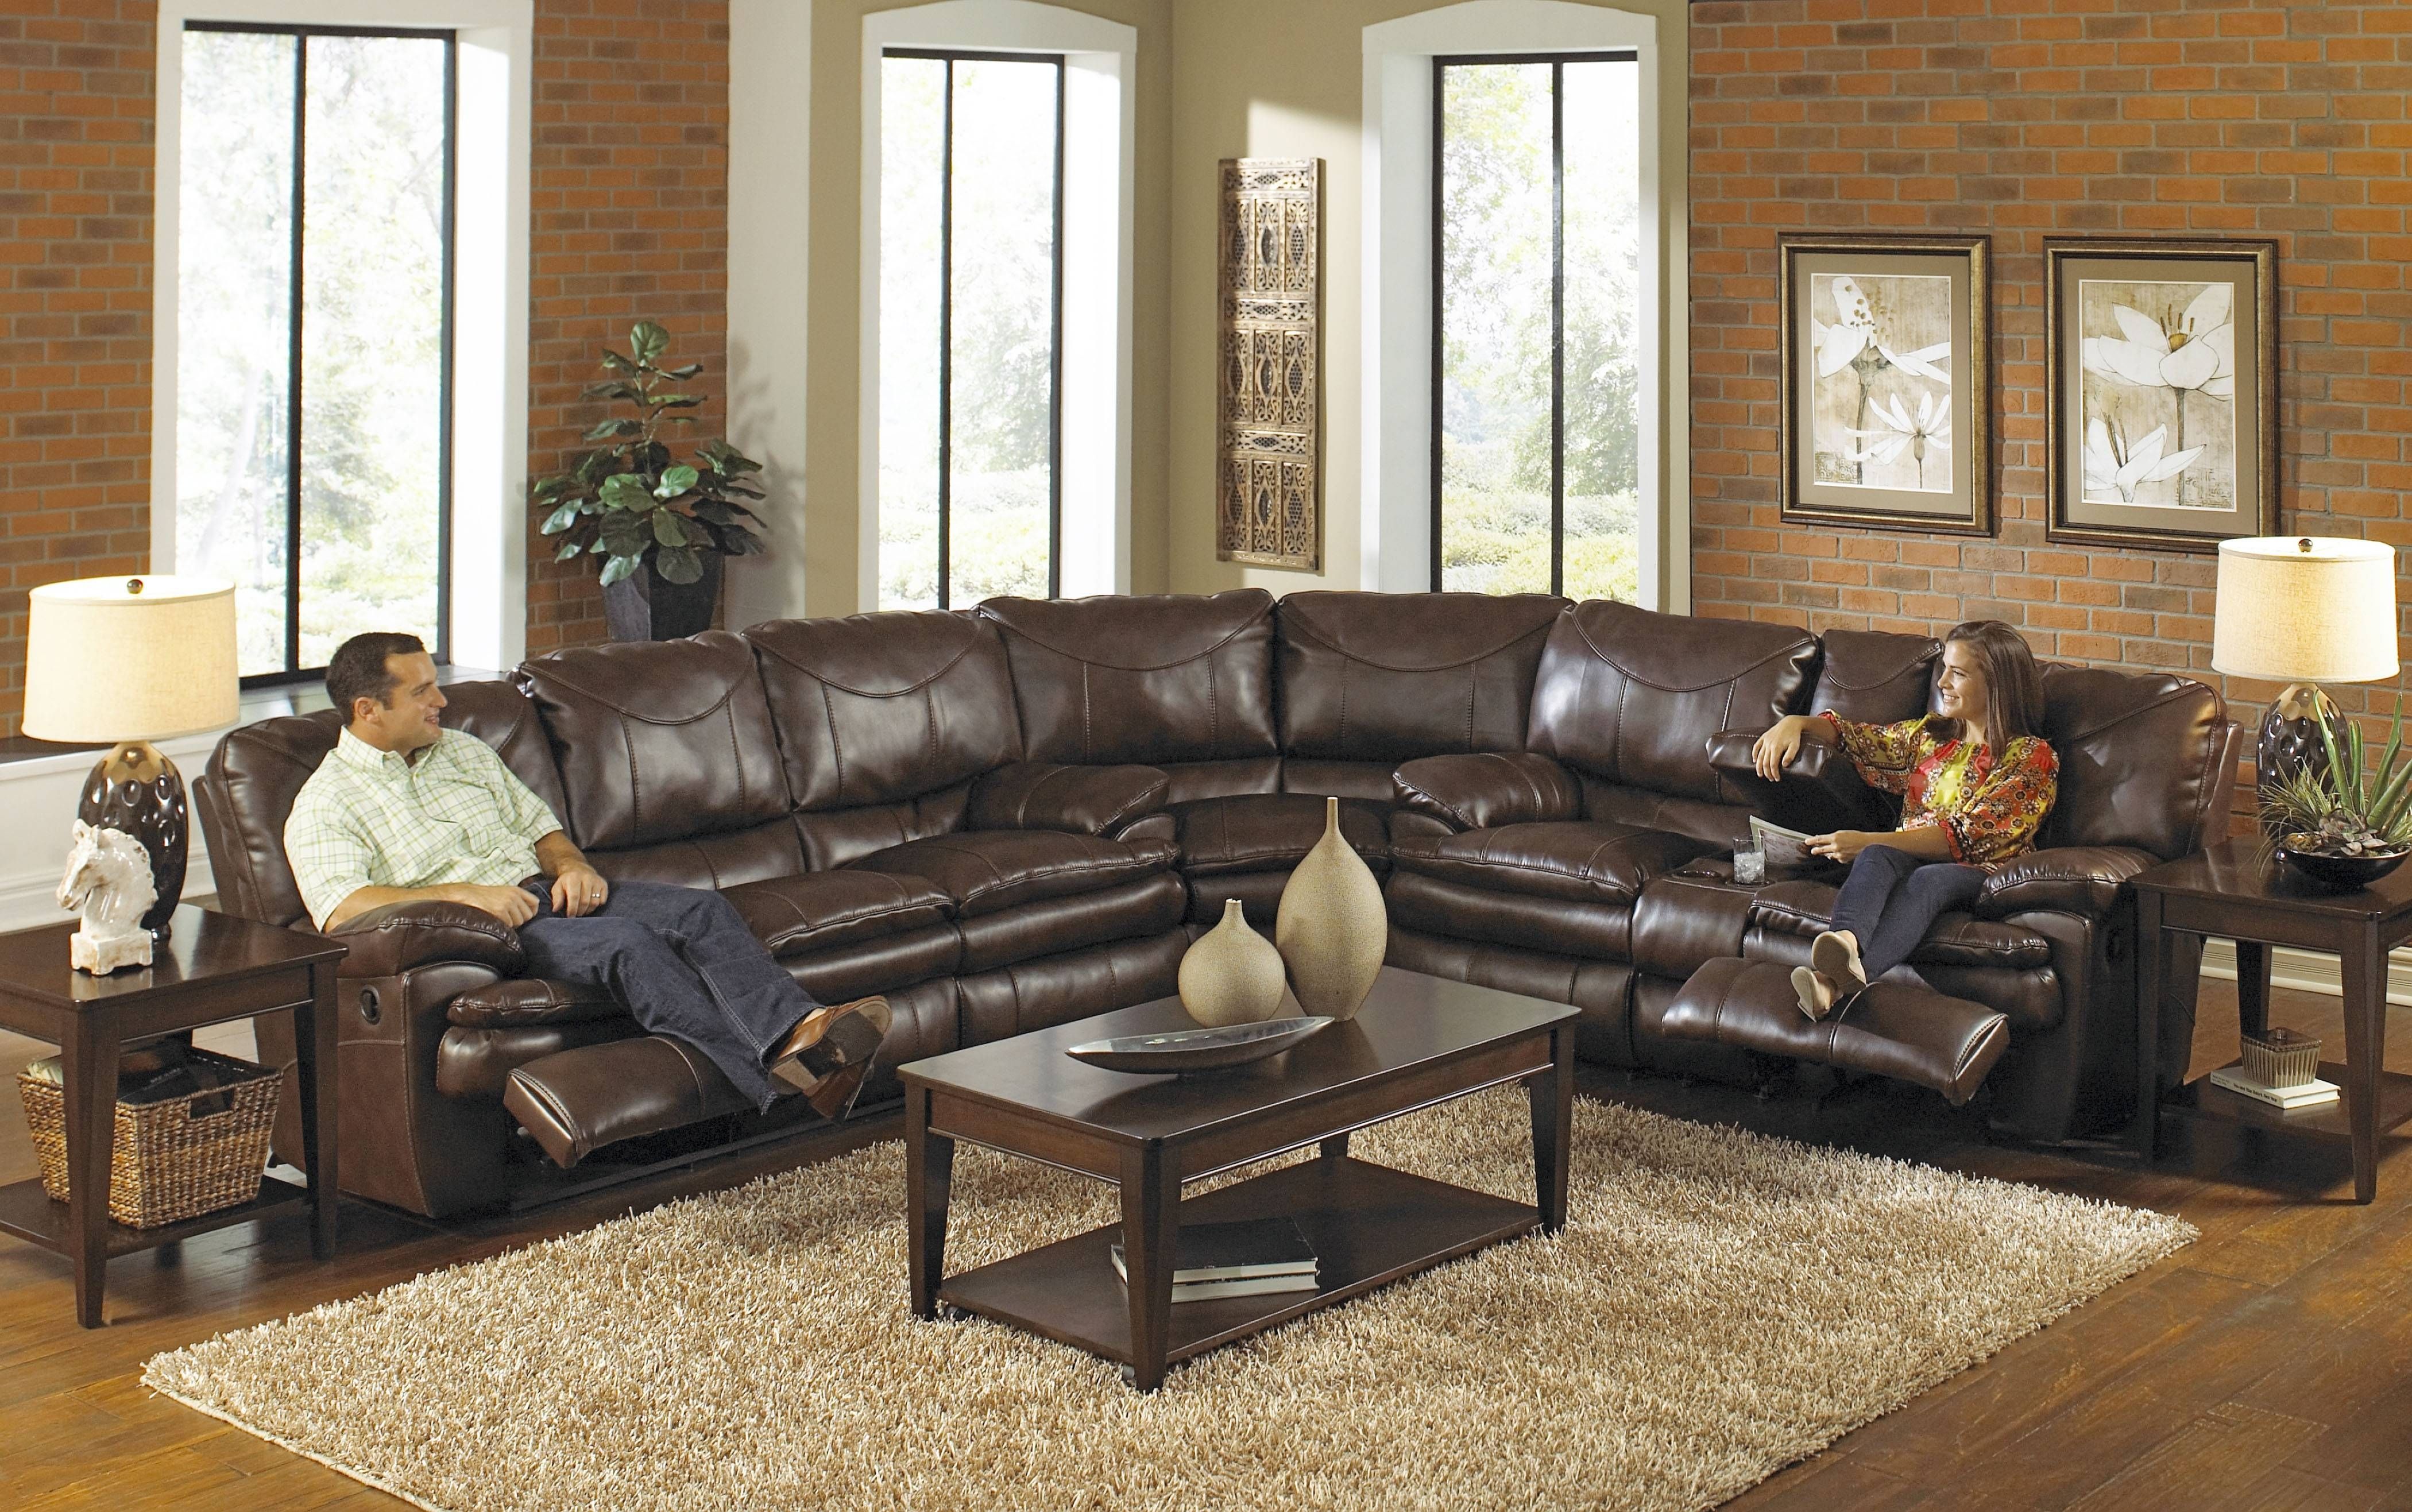 Recliner Sectional Sofa – Leather Sectional Sofa Pertaining To Jedd Fabric Reclining Sectional Sofa (View 30 of 30)